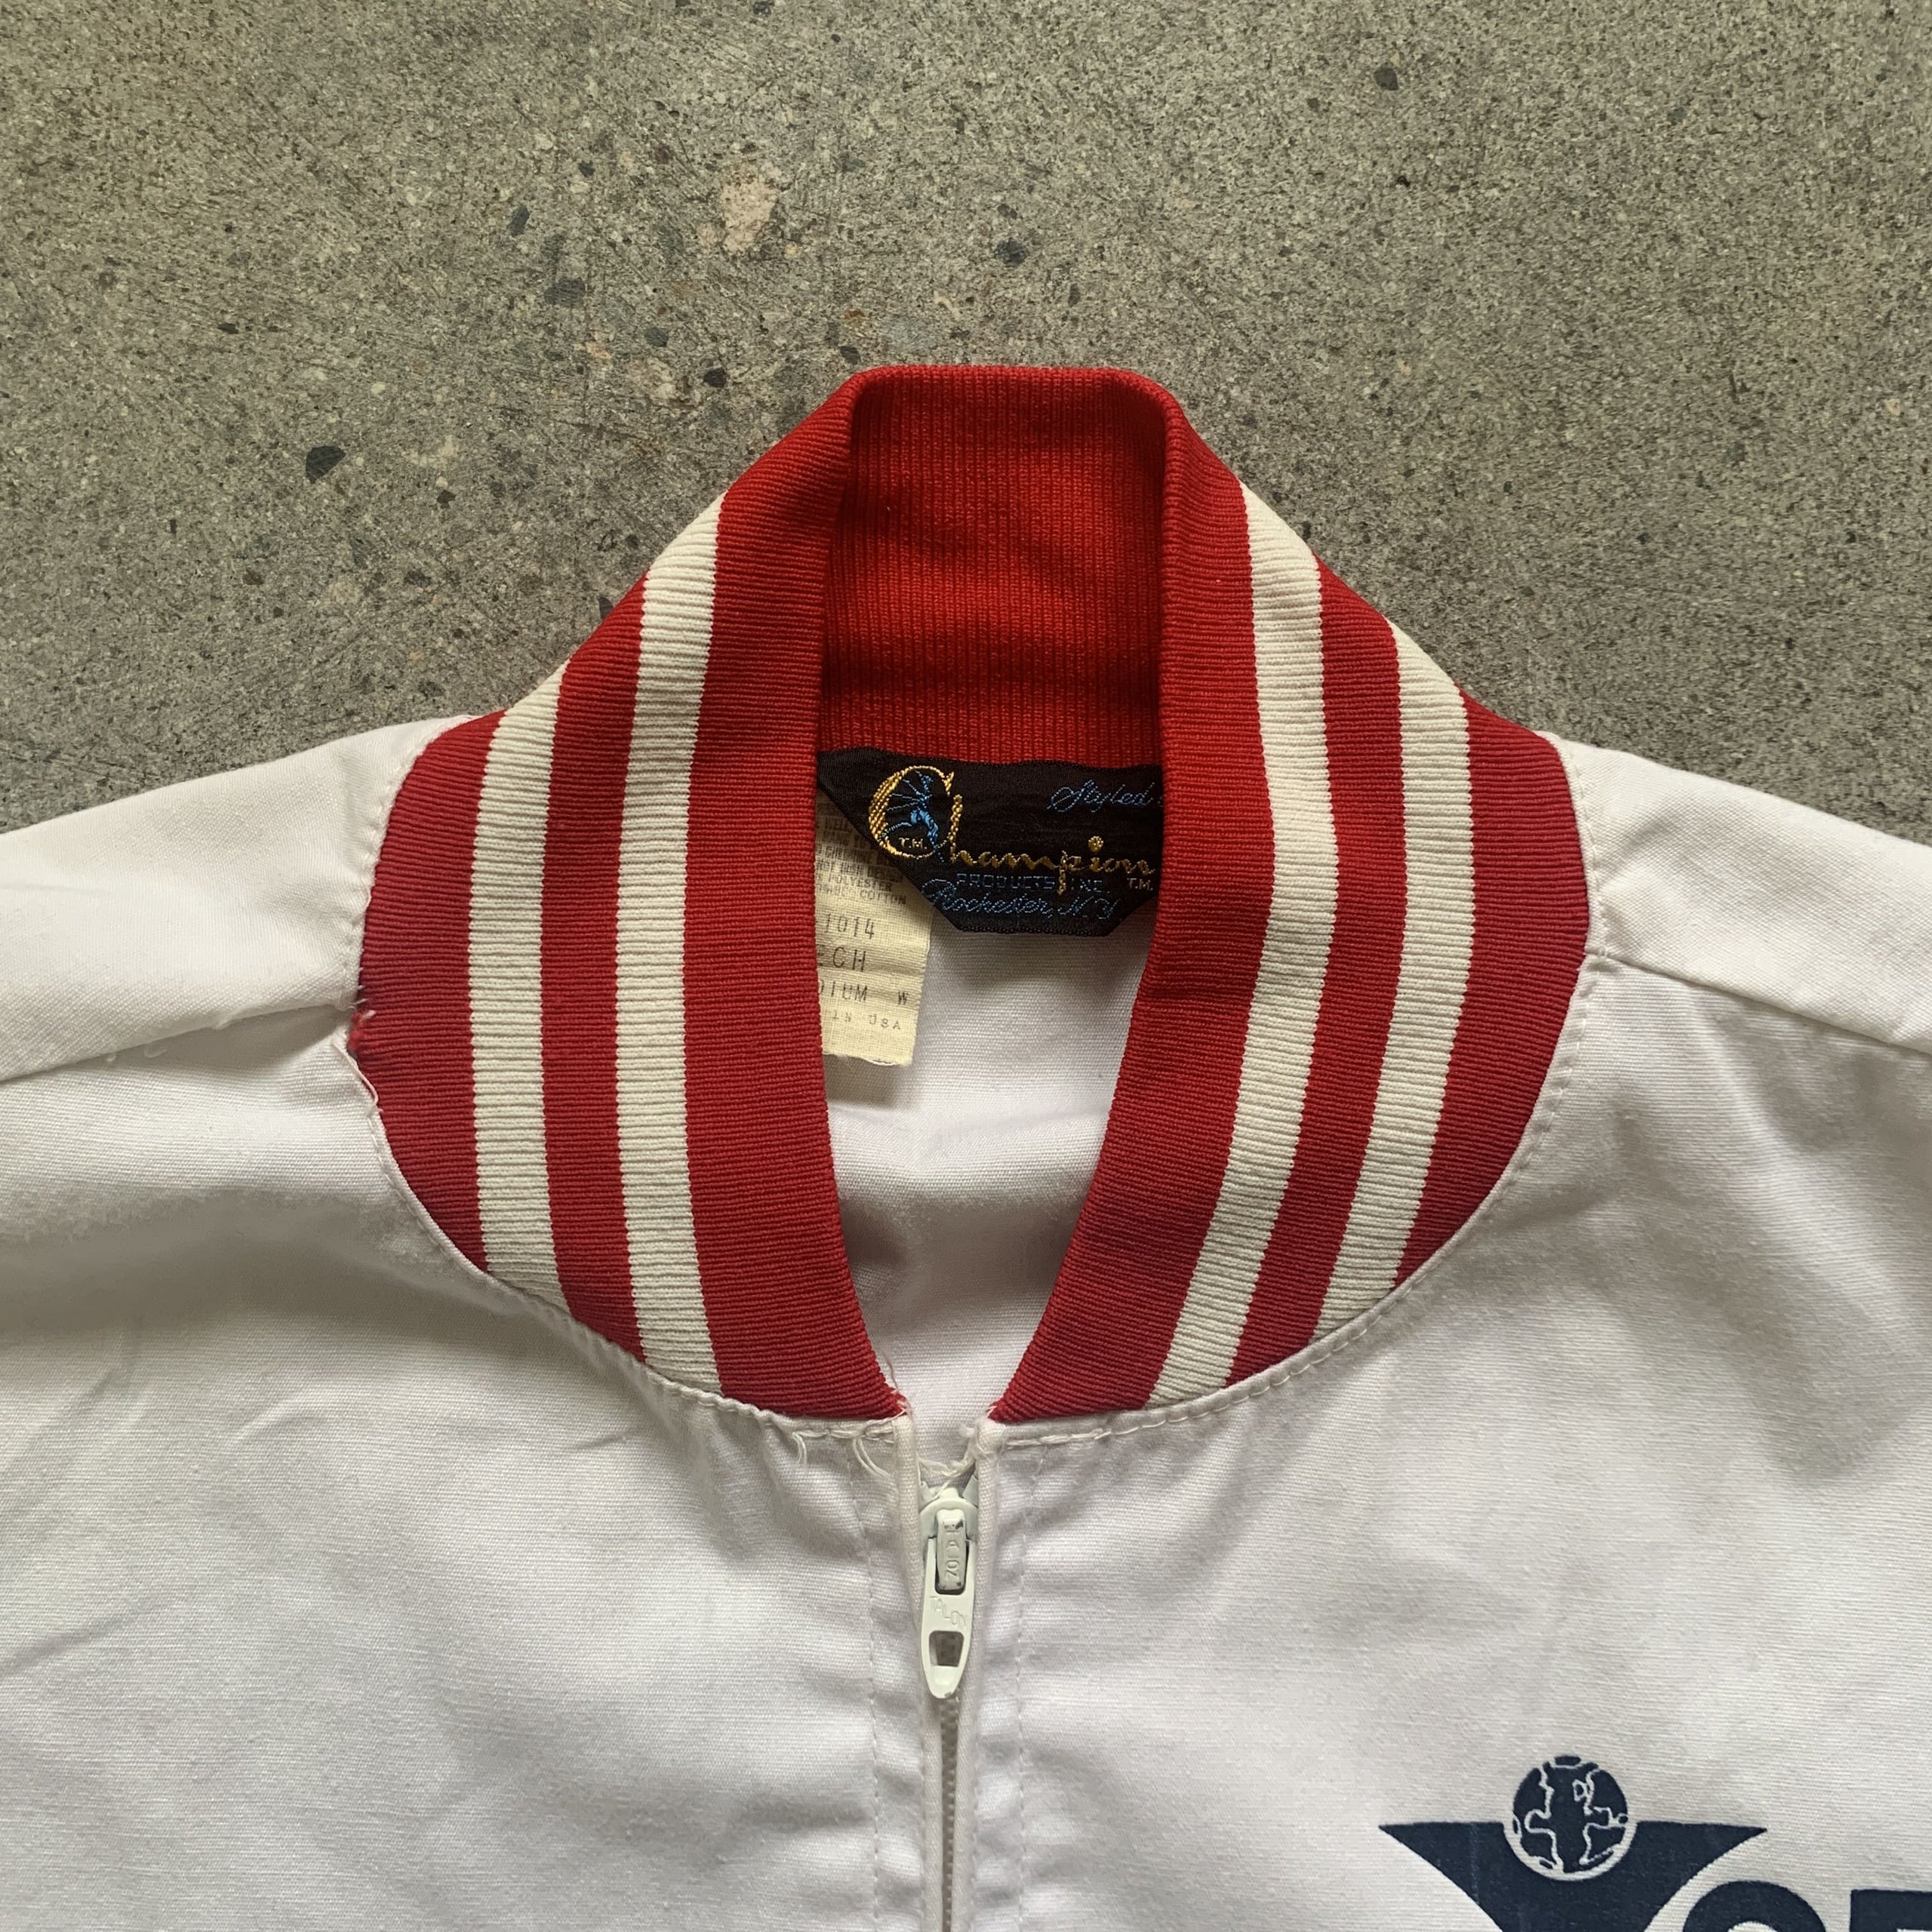 Creighton Economy Braves Authentic Game Issued/worn Polar League Schater's  Baseball Jacket Circa 1958 -  Canada